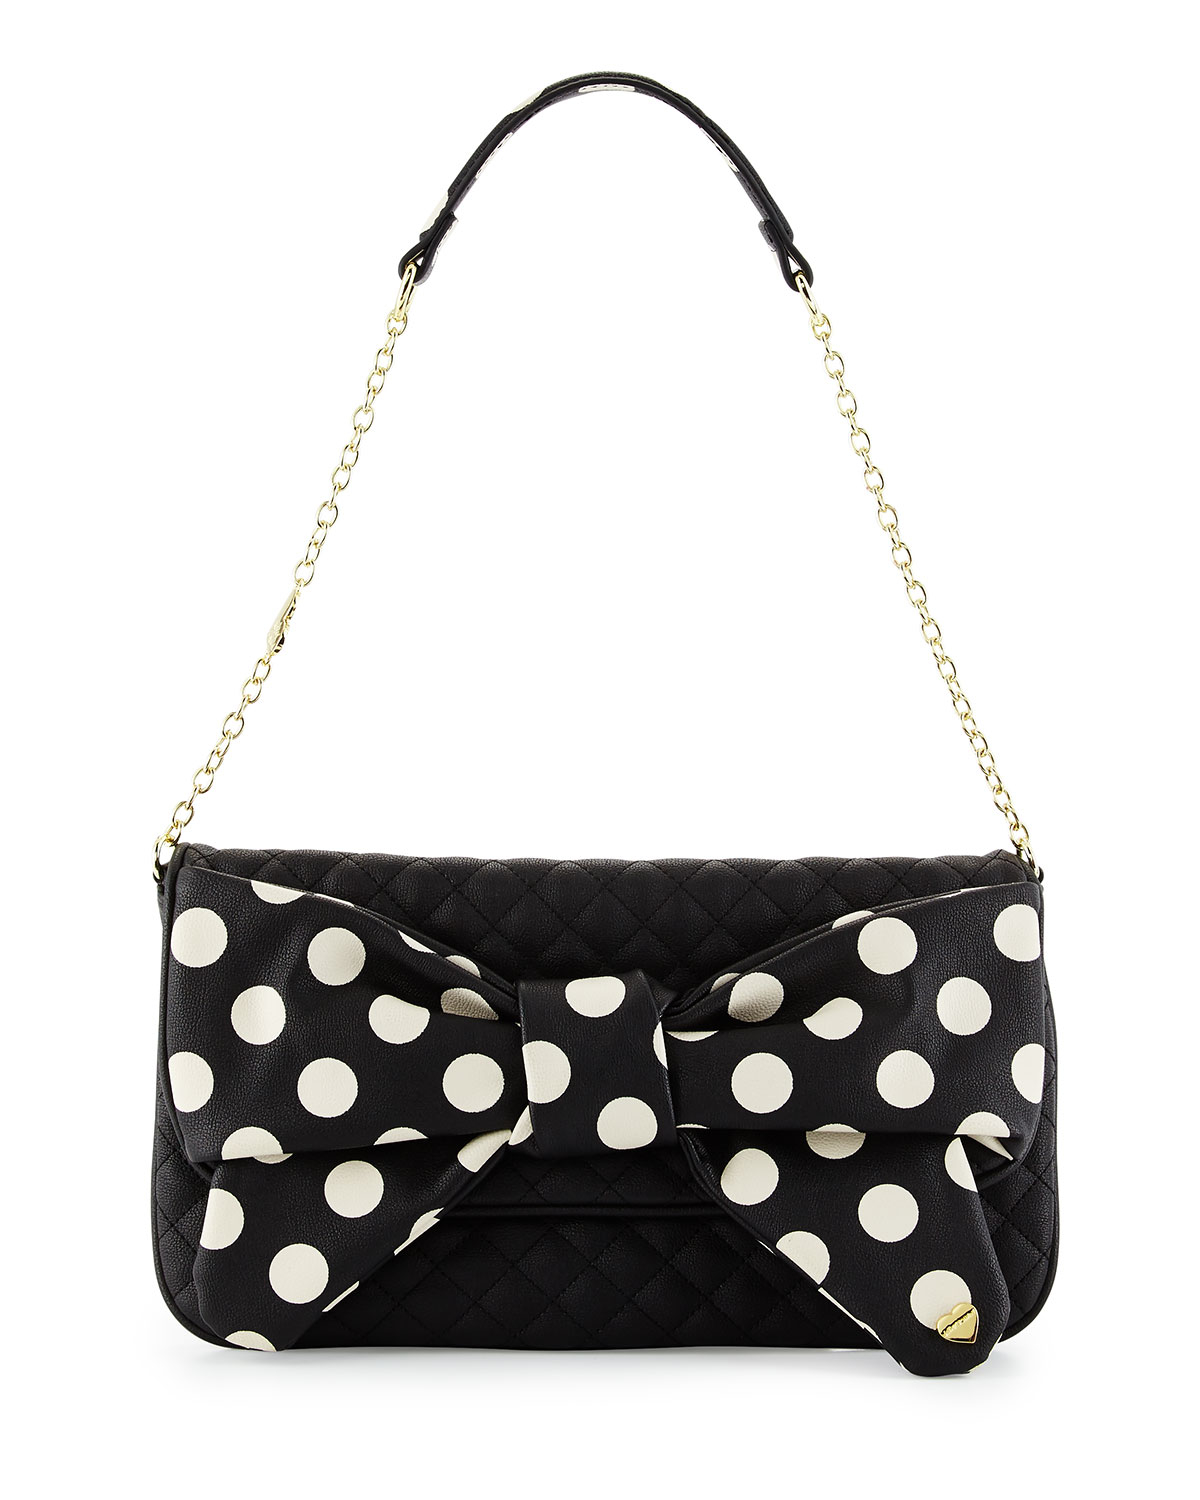 Betsey johnson Dots Enough Bow Quilted Shoulder Bag in Black | Lyst